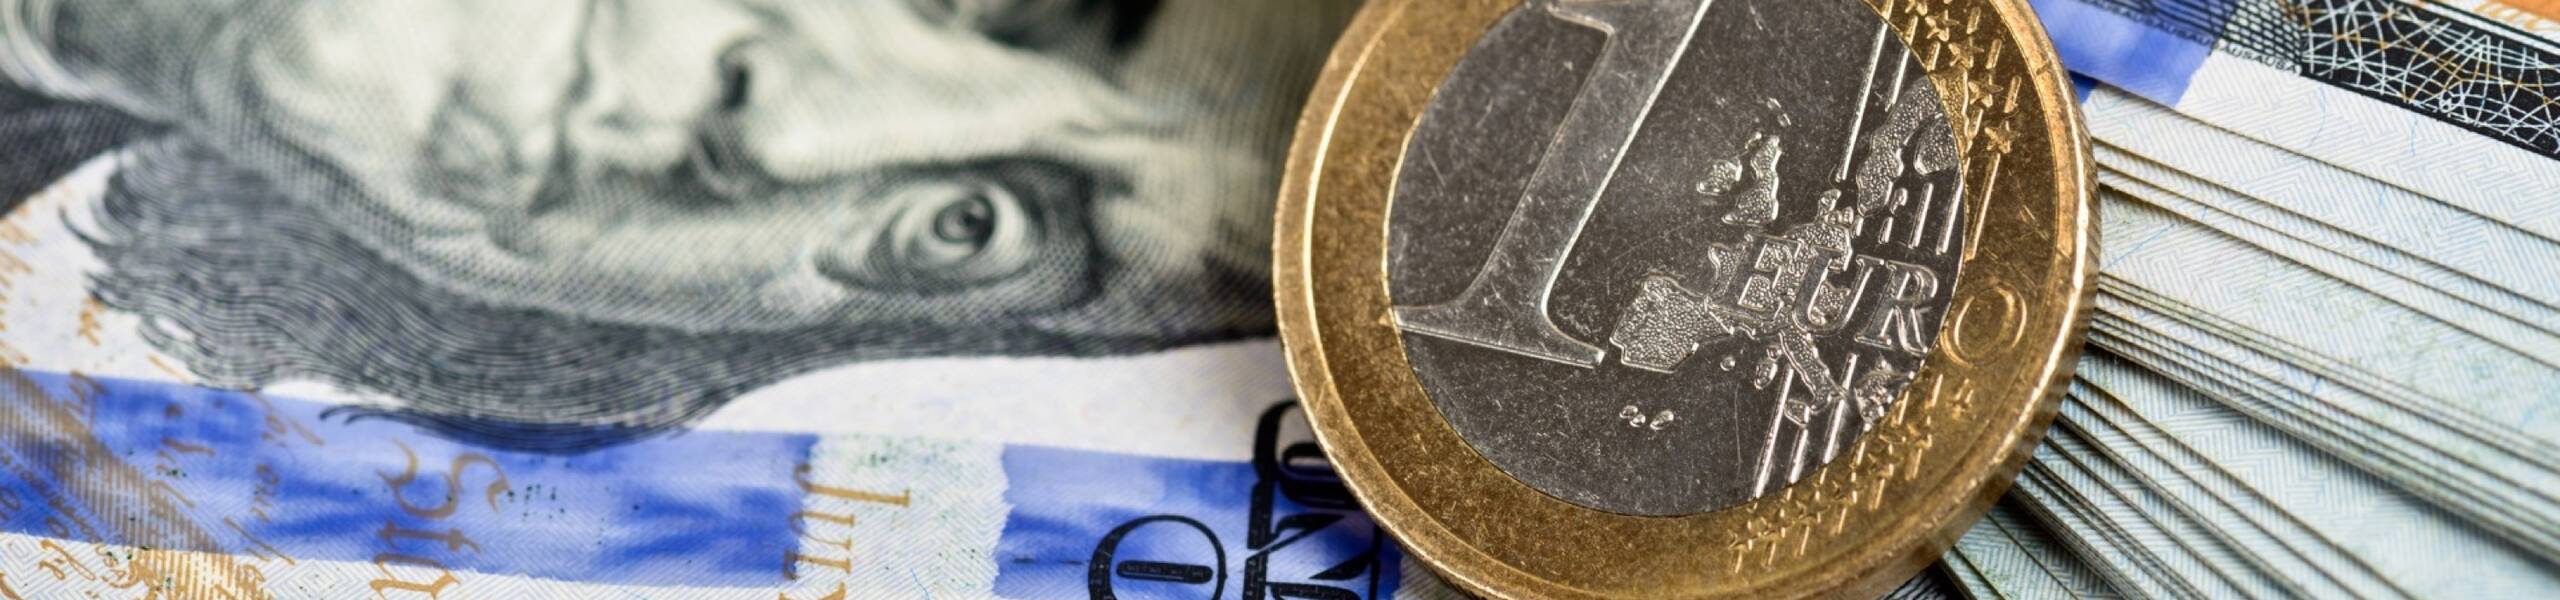 EUR/USD: price to test the nearest support